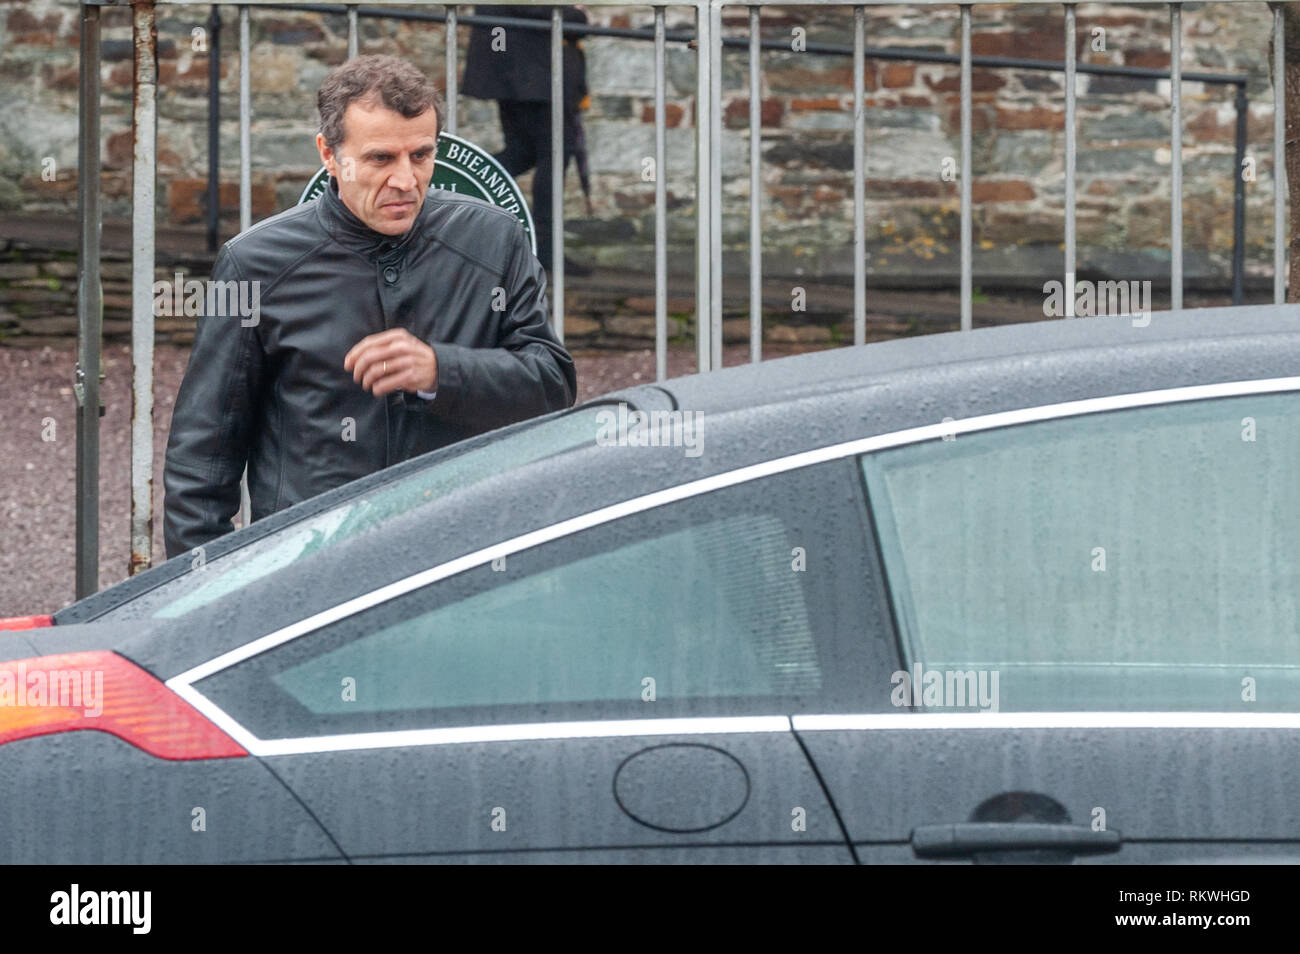 Bantry, West Cork, Ireland. 12th Feb, 2019. The funeral of French artist and writer Tomi Ungerer was held at the Church of St. Brendan the Navigator in Bantry today.  Mr Stéphane Crouzat, Ambassador of France to Ireland who spoke at the funeral with a message from President Macron, is pictured leaving the church. Mr Ungerer's remains are to be cremated tomorrow in a private ceremony. Credit: Andy Gibson/Alamy Live News. Stock Photo